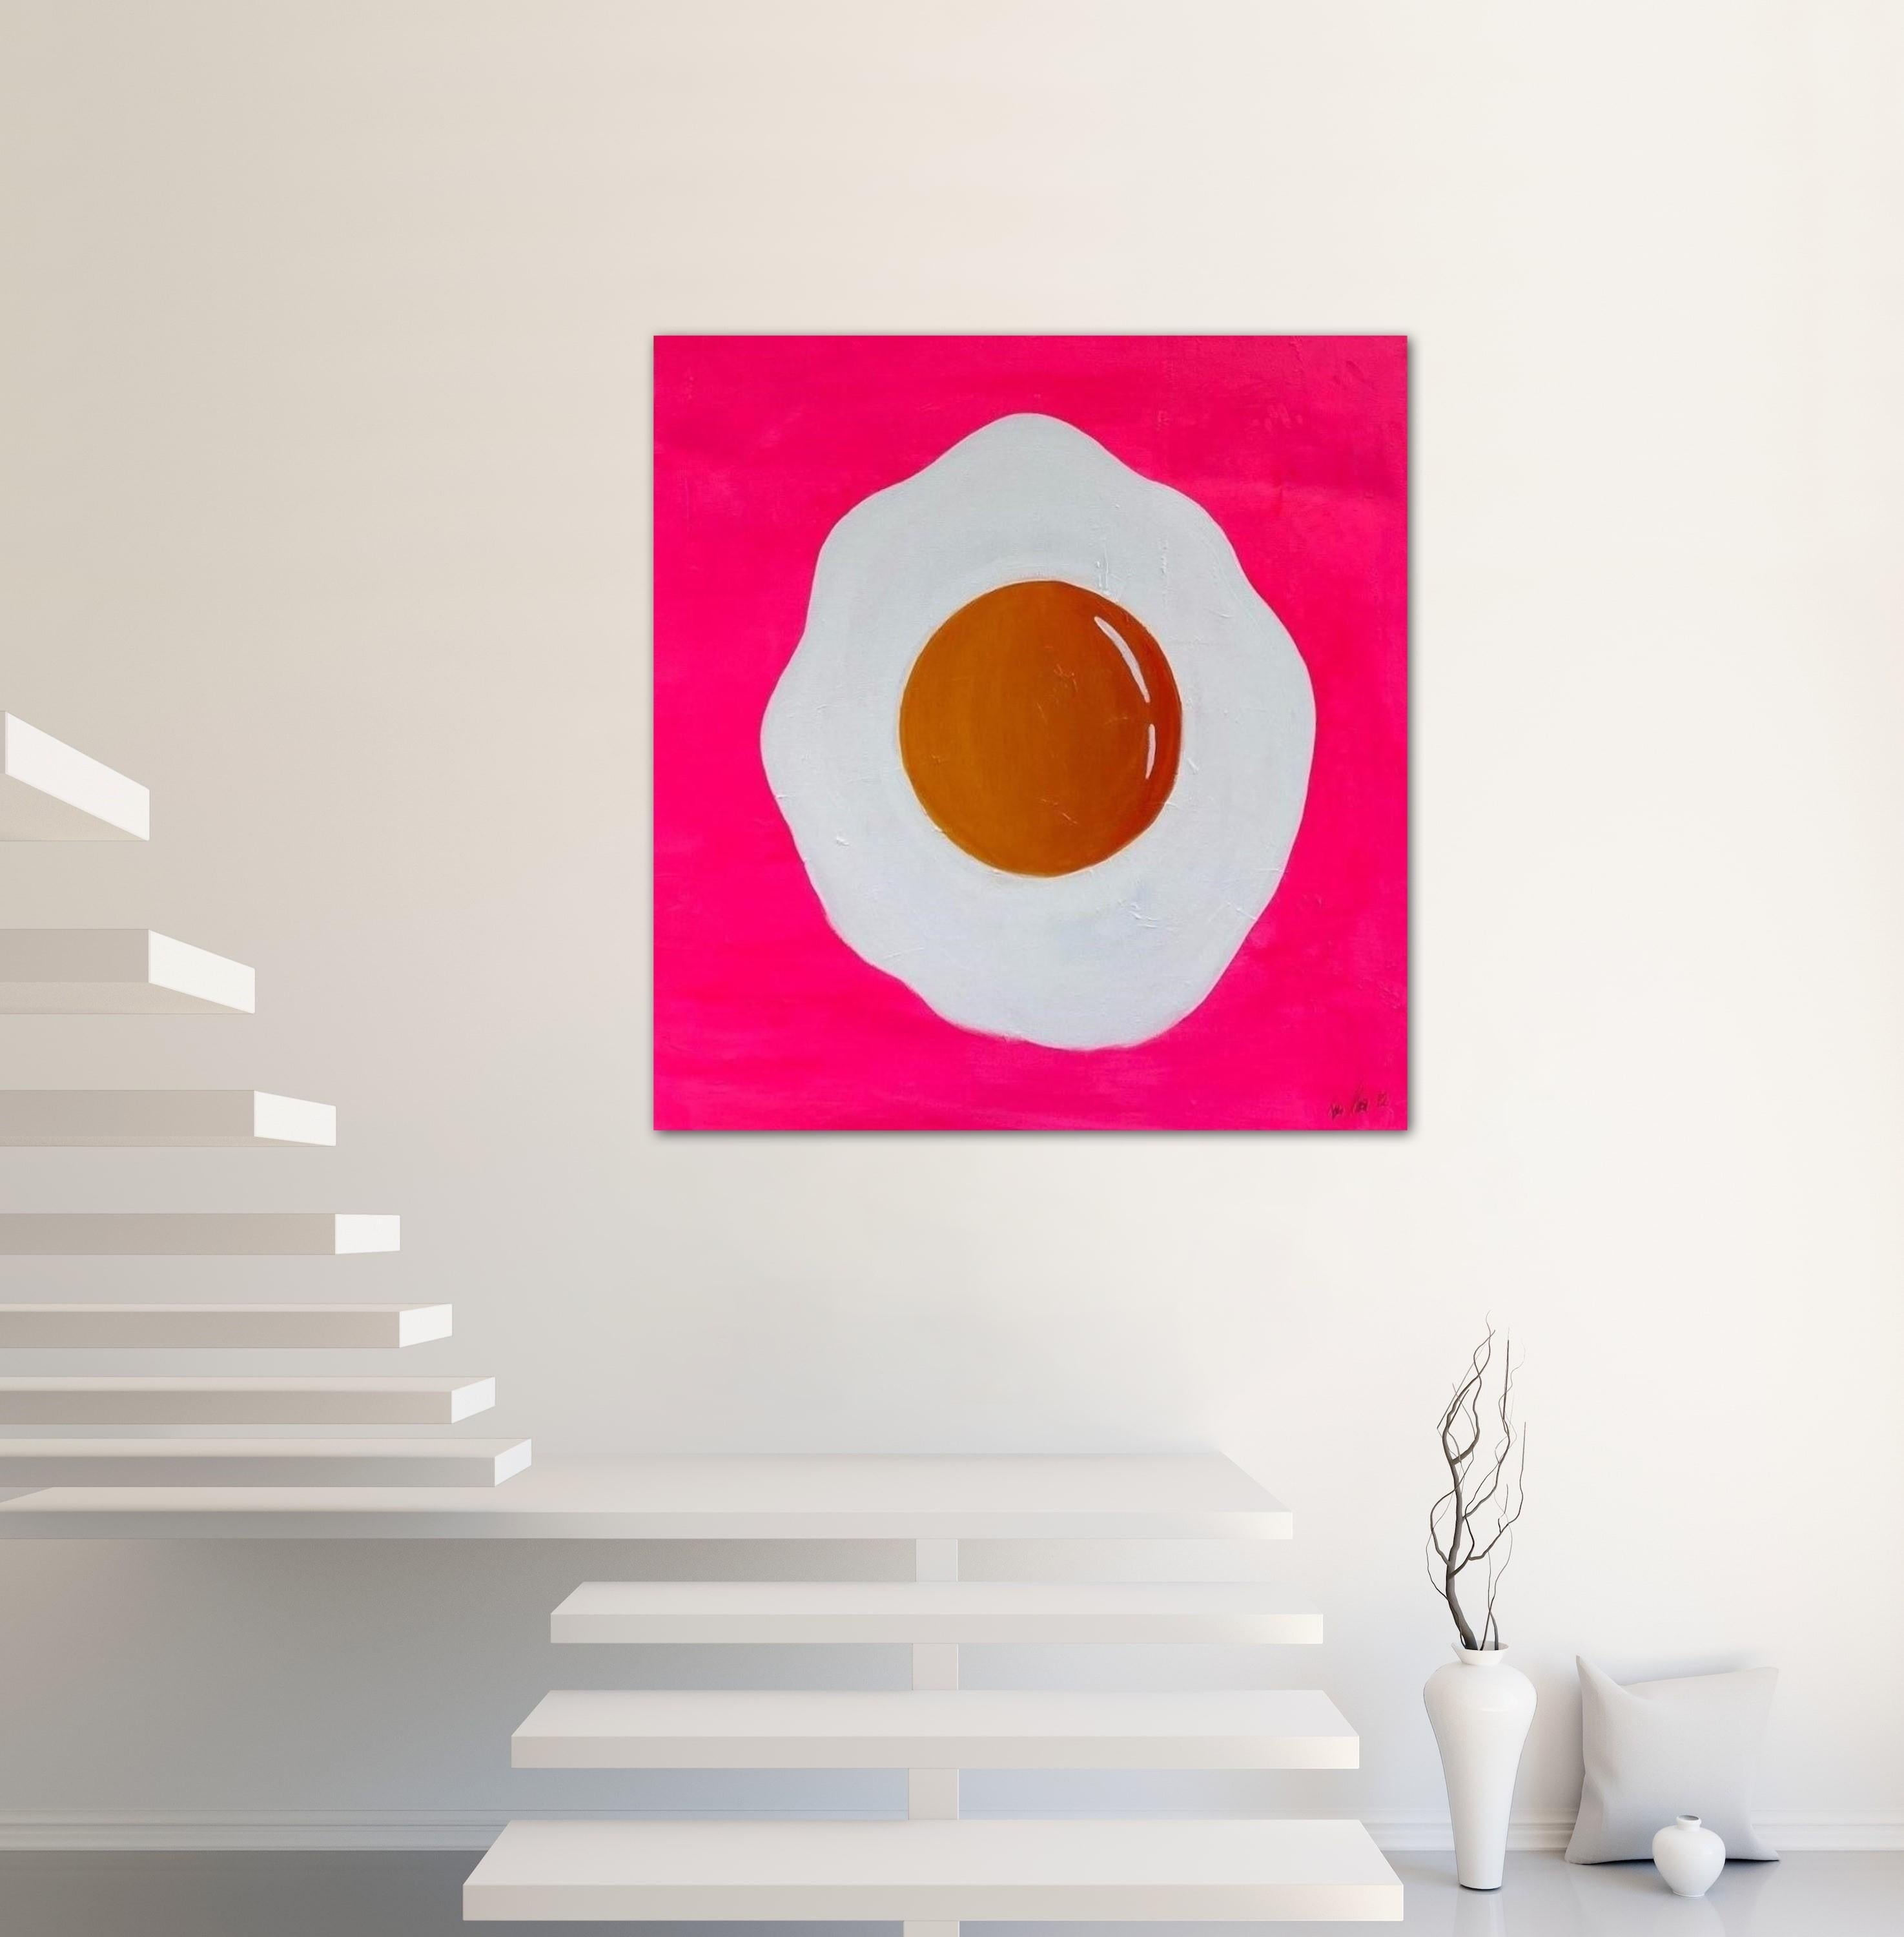 Fried Egg Acrylic on Canvas By Artist Painter Tone Murr . Modern pop contemporary Wall Art . Bright Colors Pink White and Yellow Original Acrylic on Canvas . Hand painted minimal modernist design and a Great contemporary painting . Artist : Art +